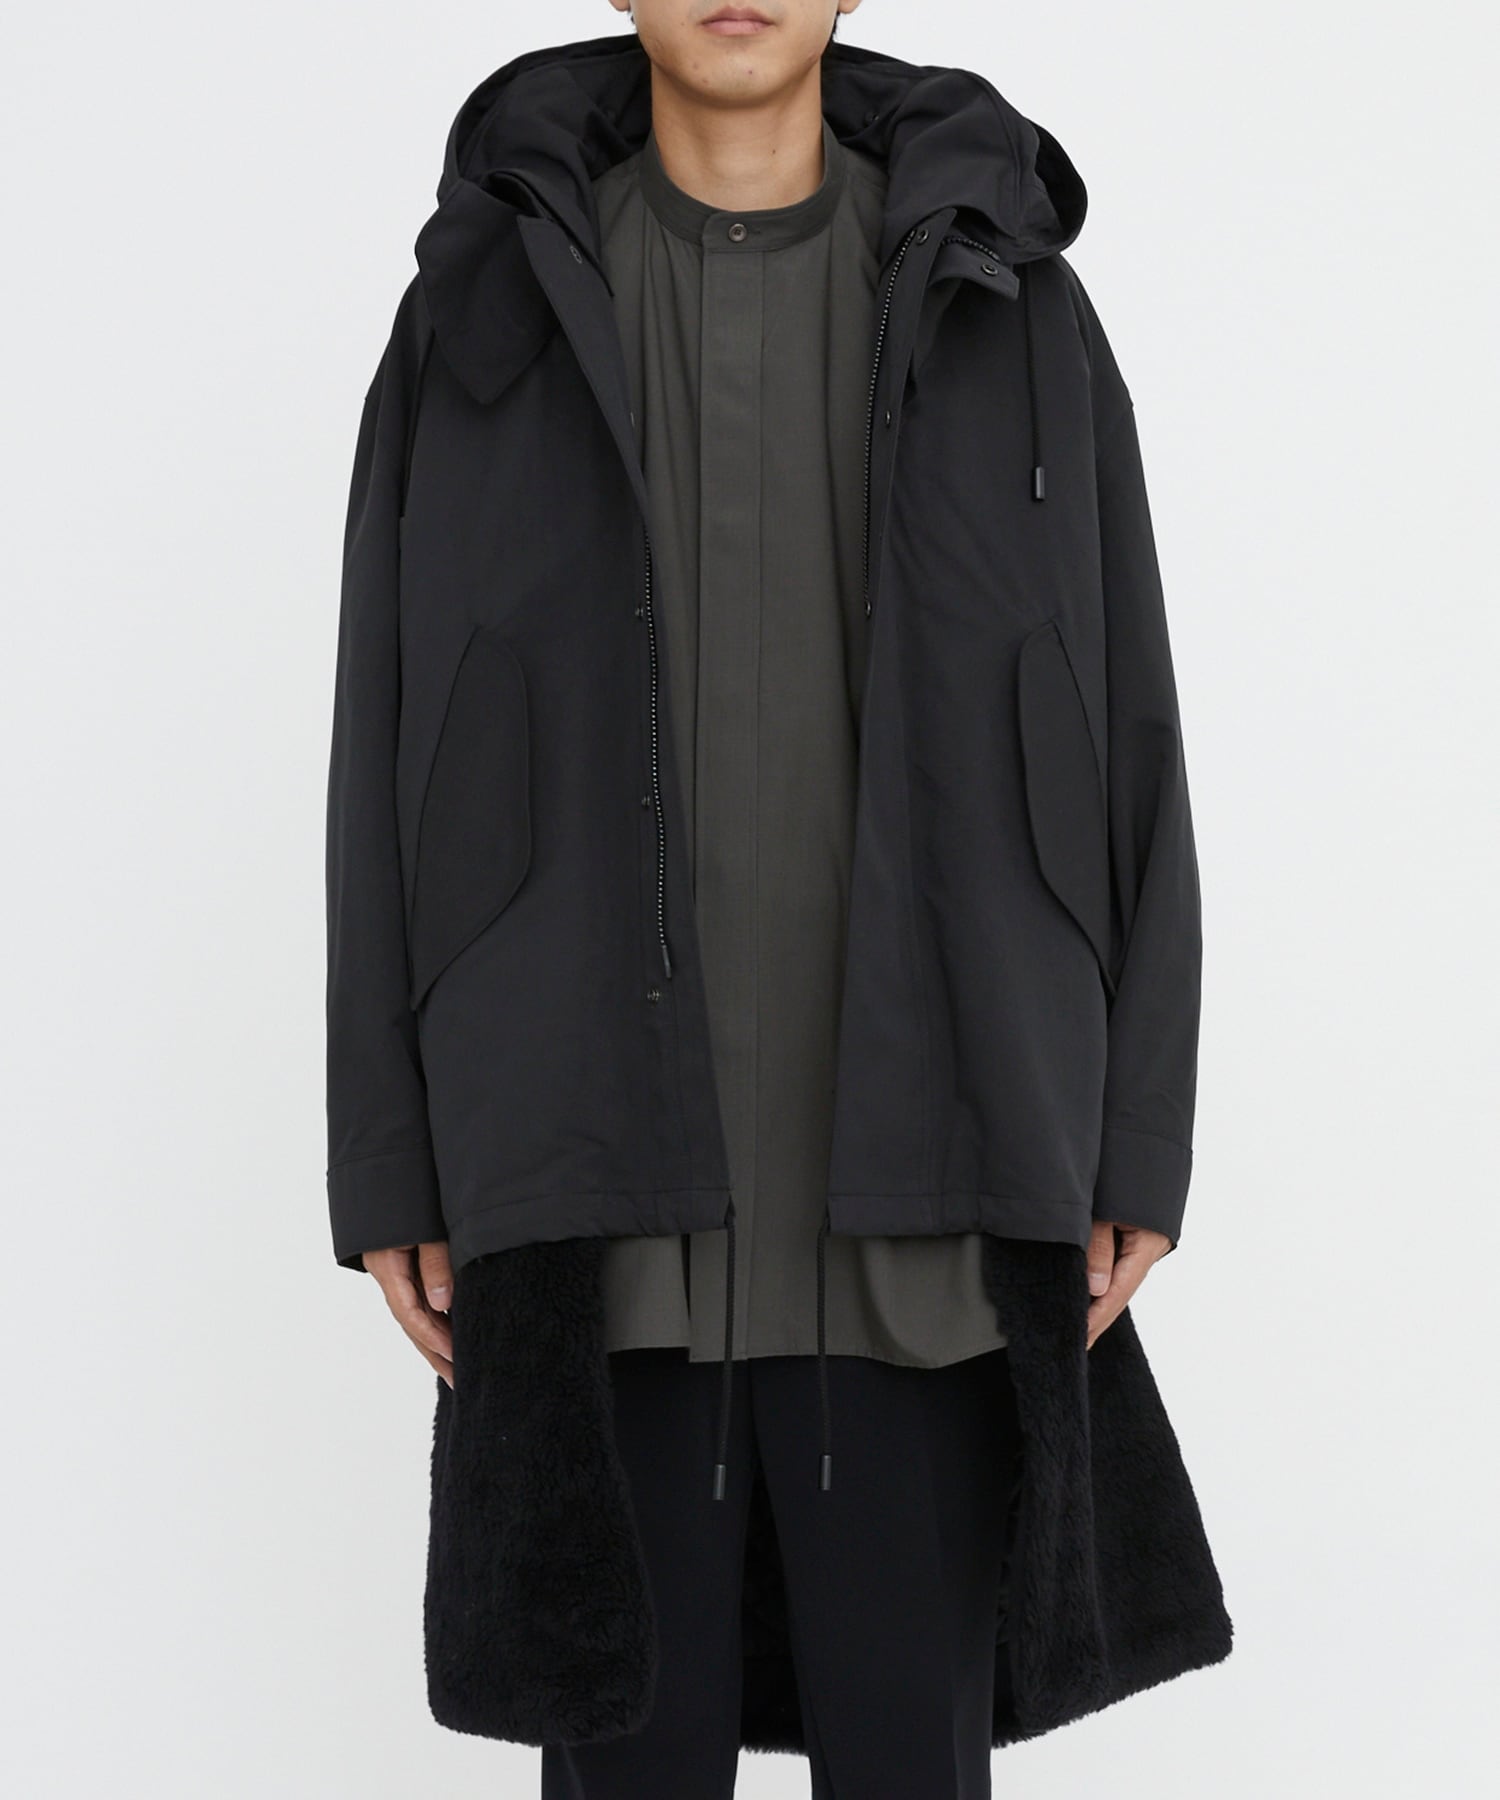 THE MODS COAT WITH LINER | RERACS